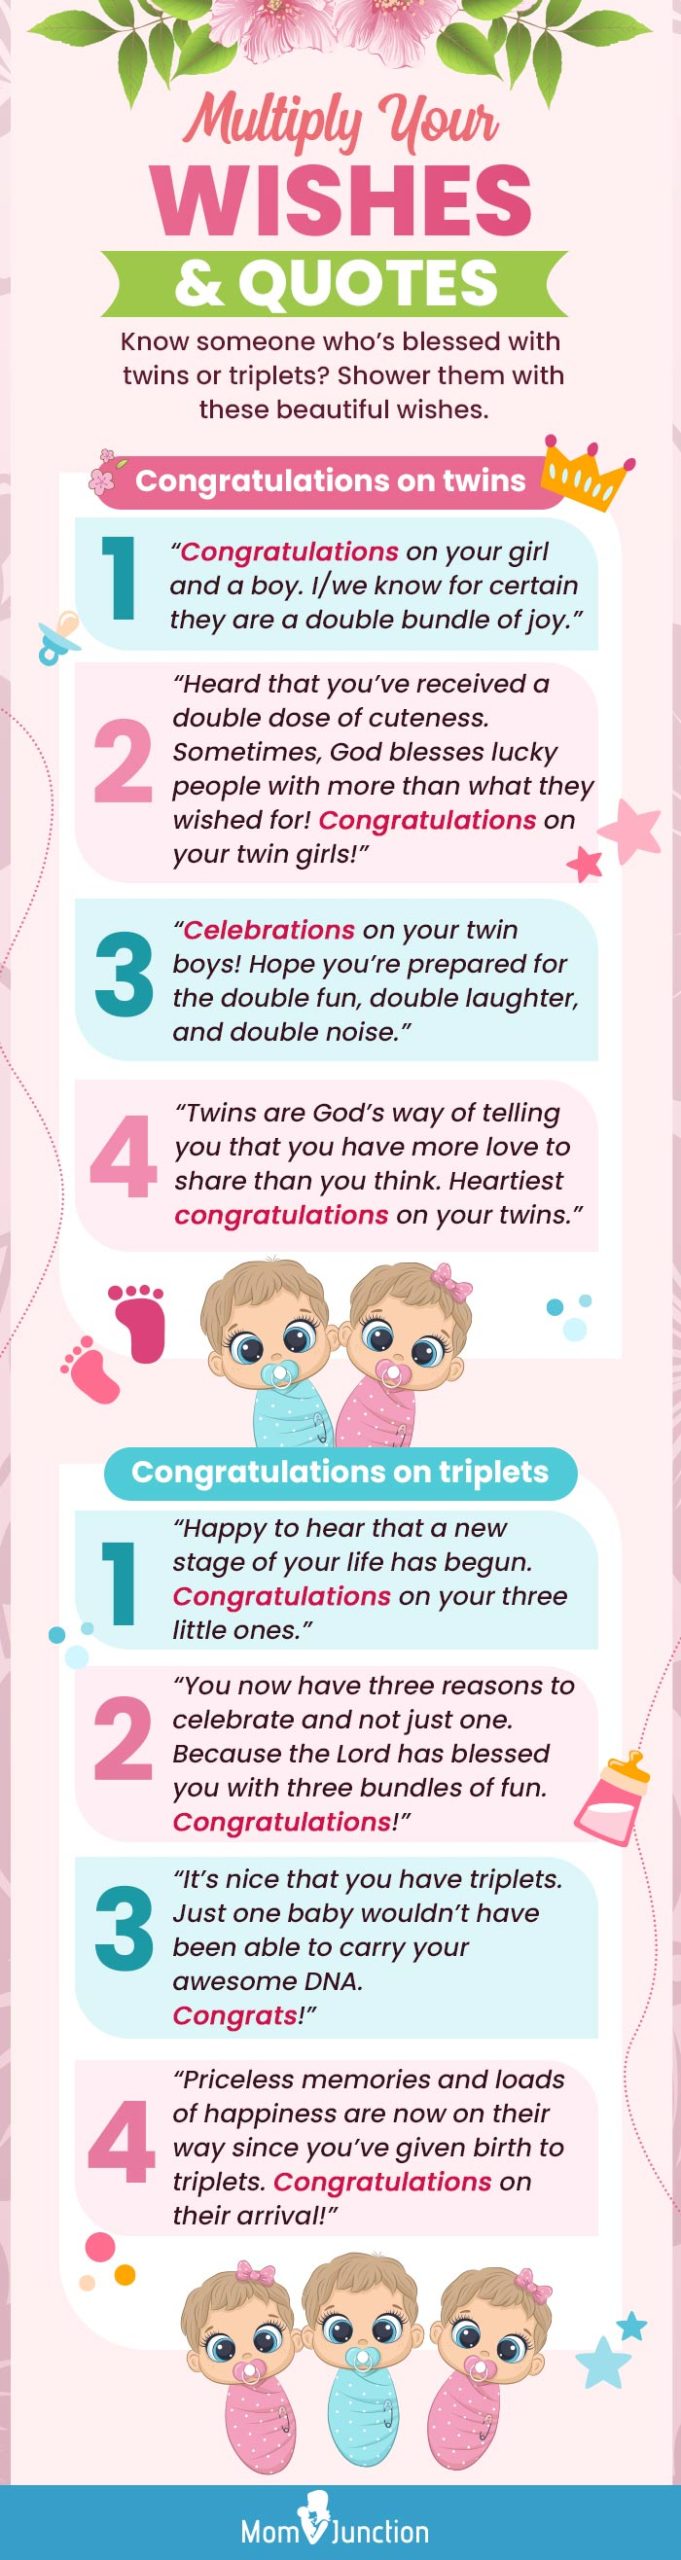 newborn wishes for twins and triplets [infographic]